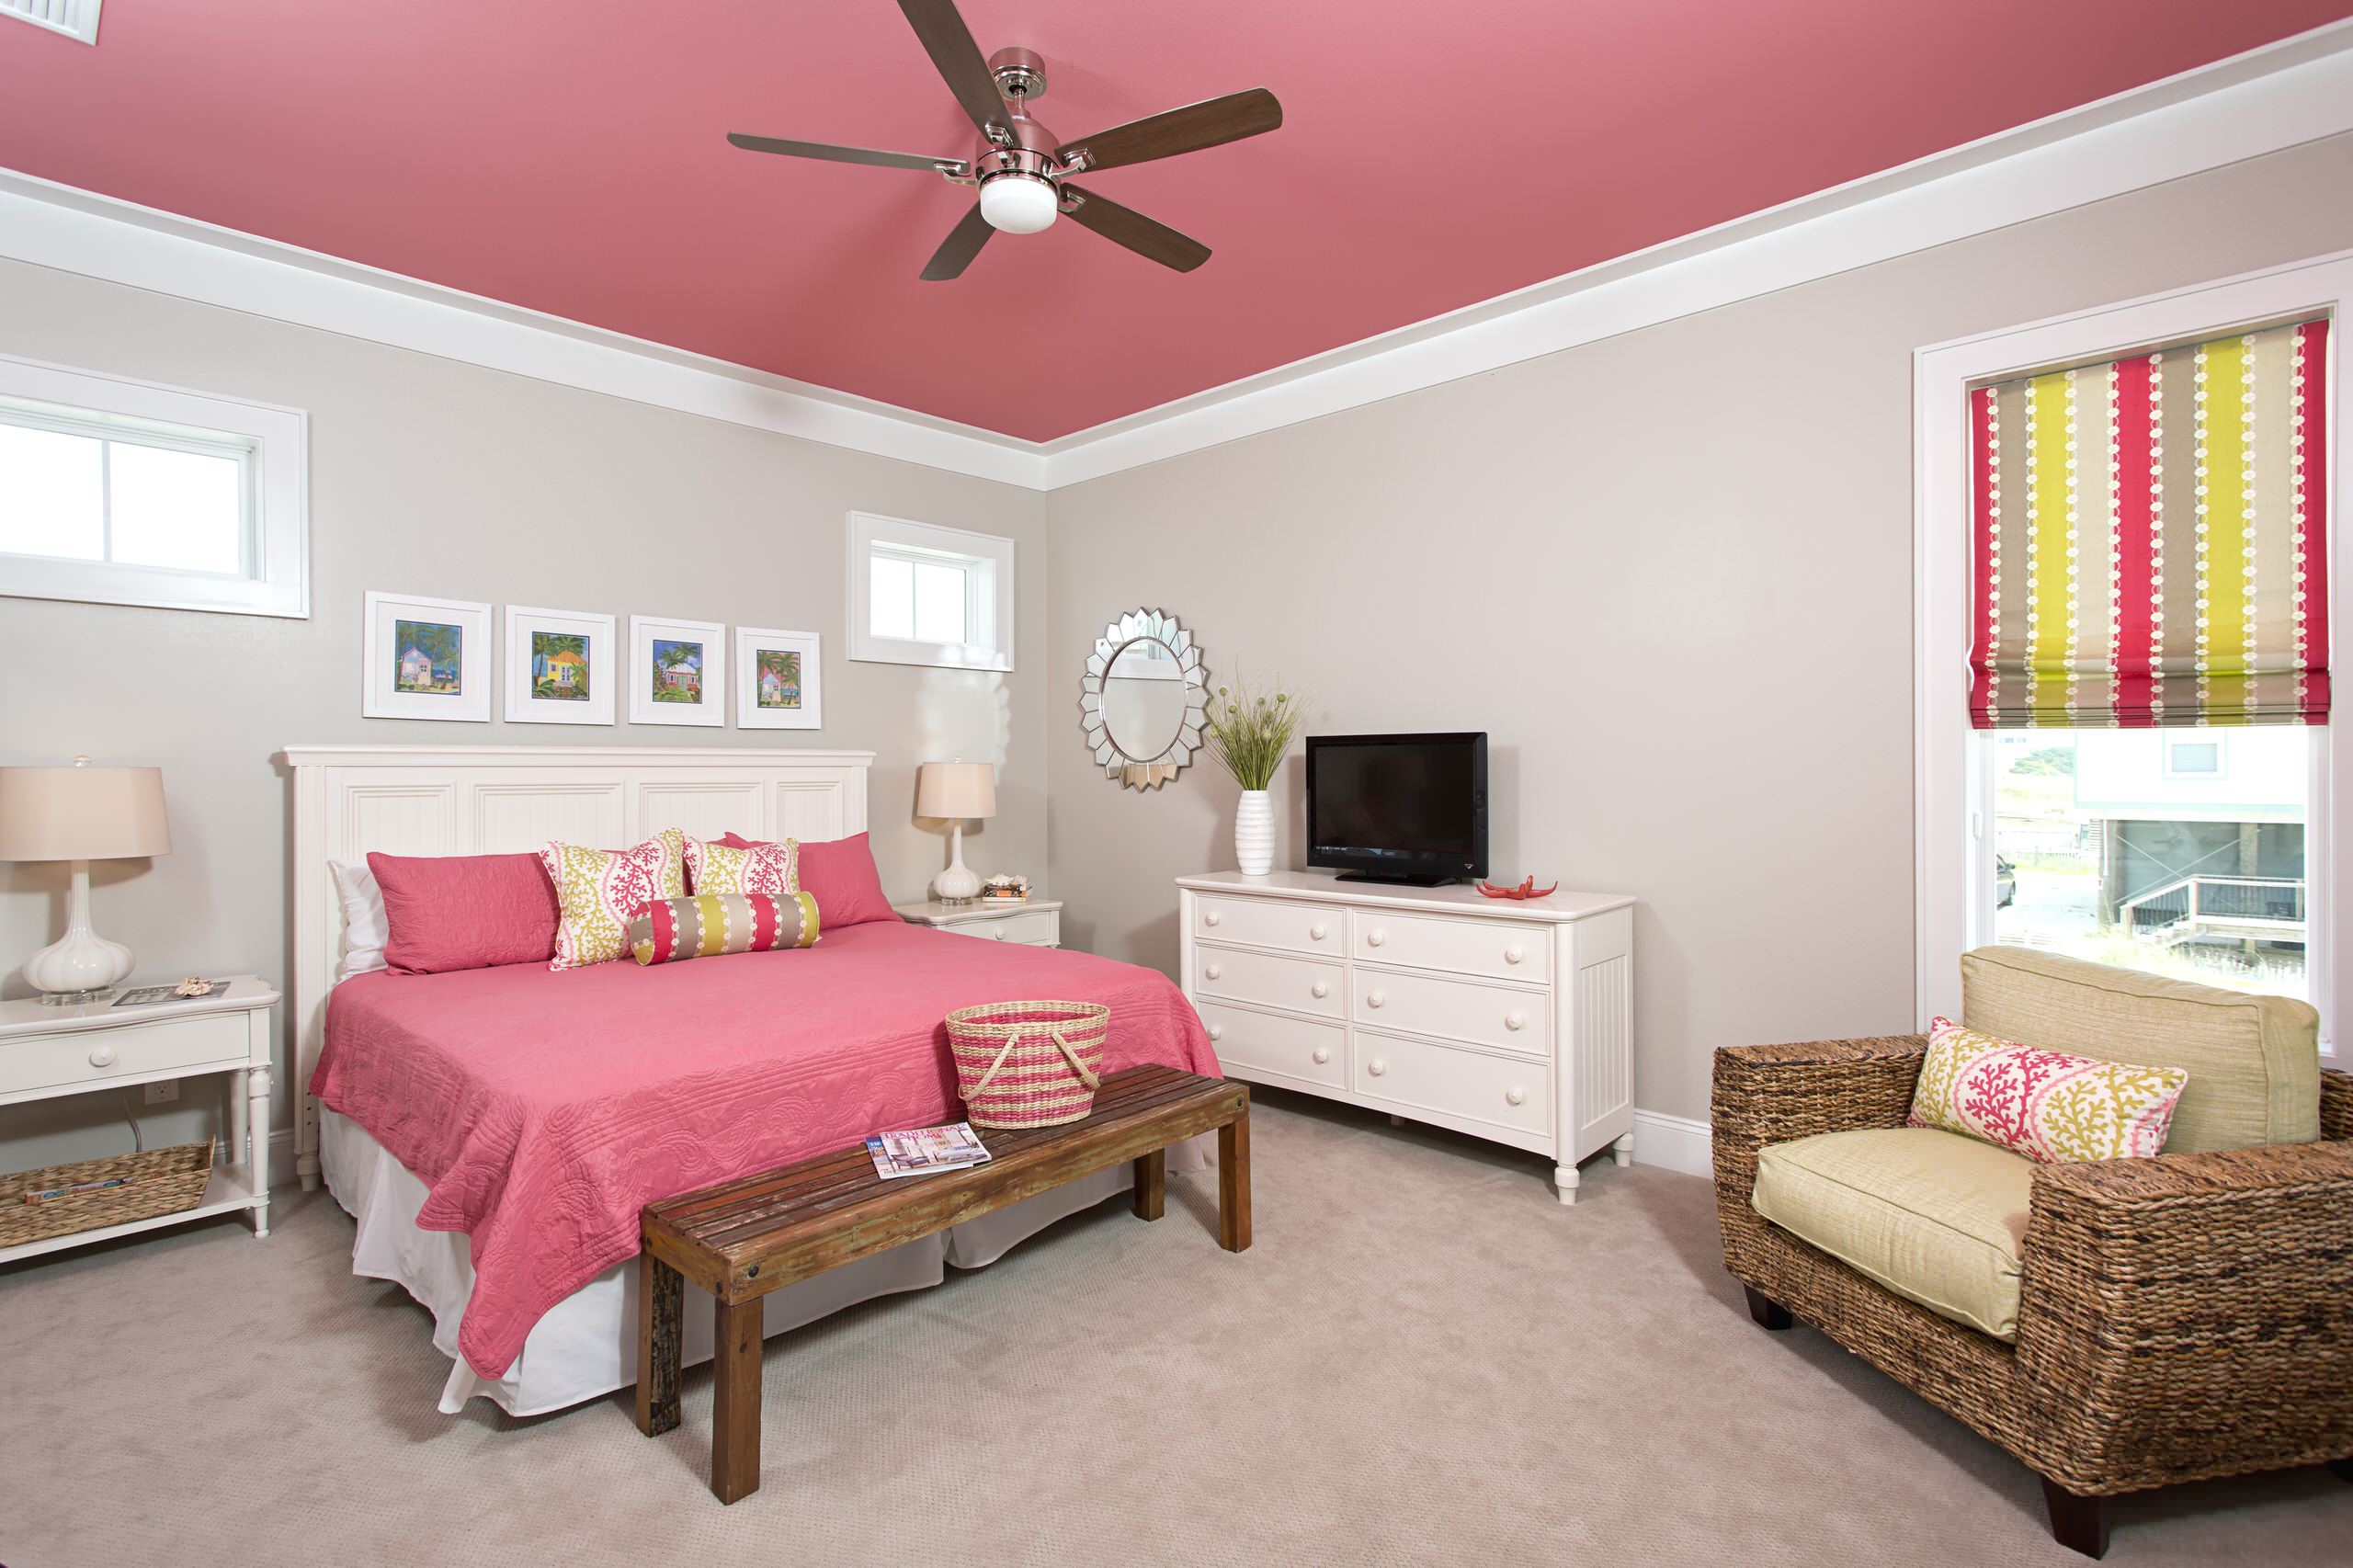 Pink Ceiling in the Bedroom